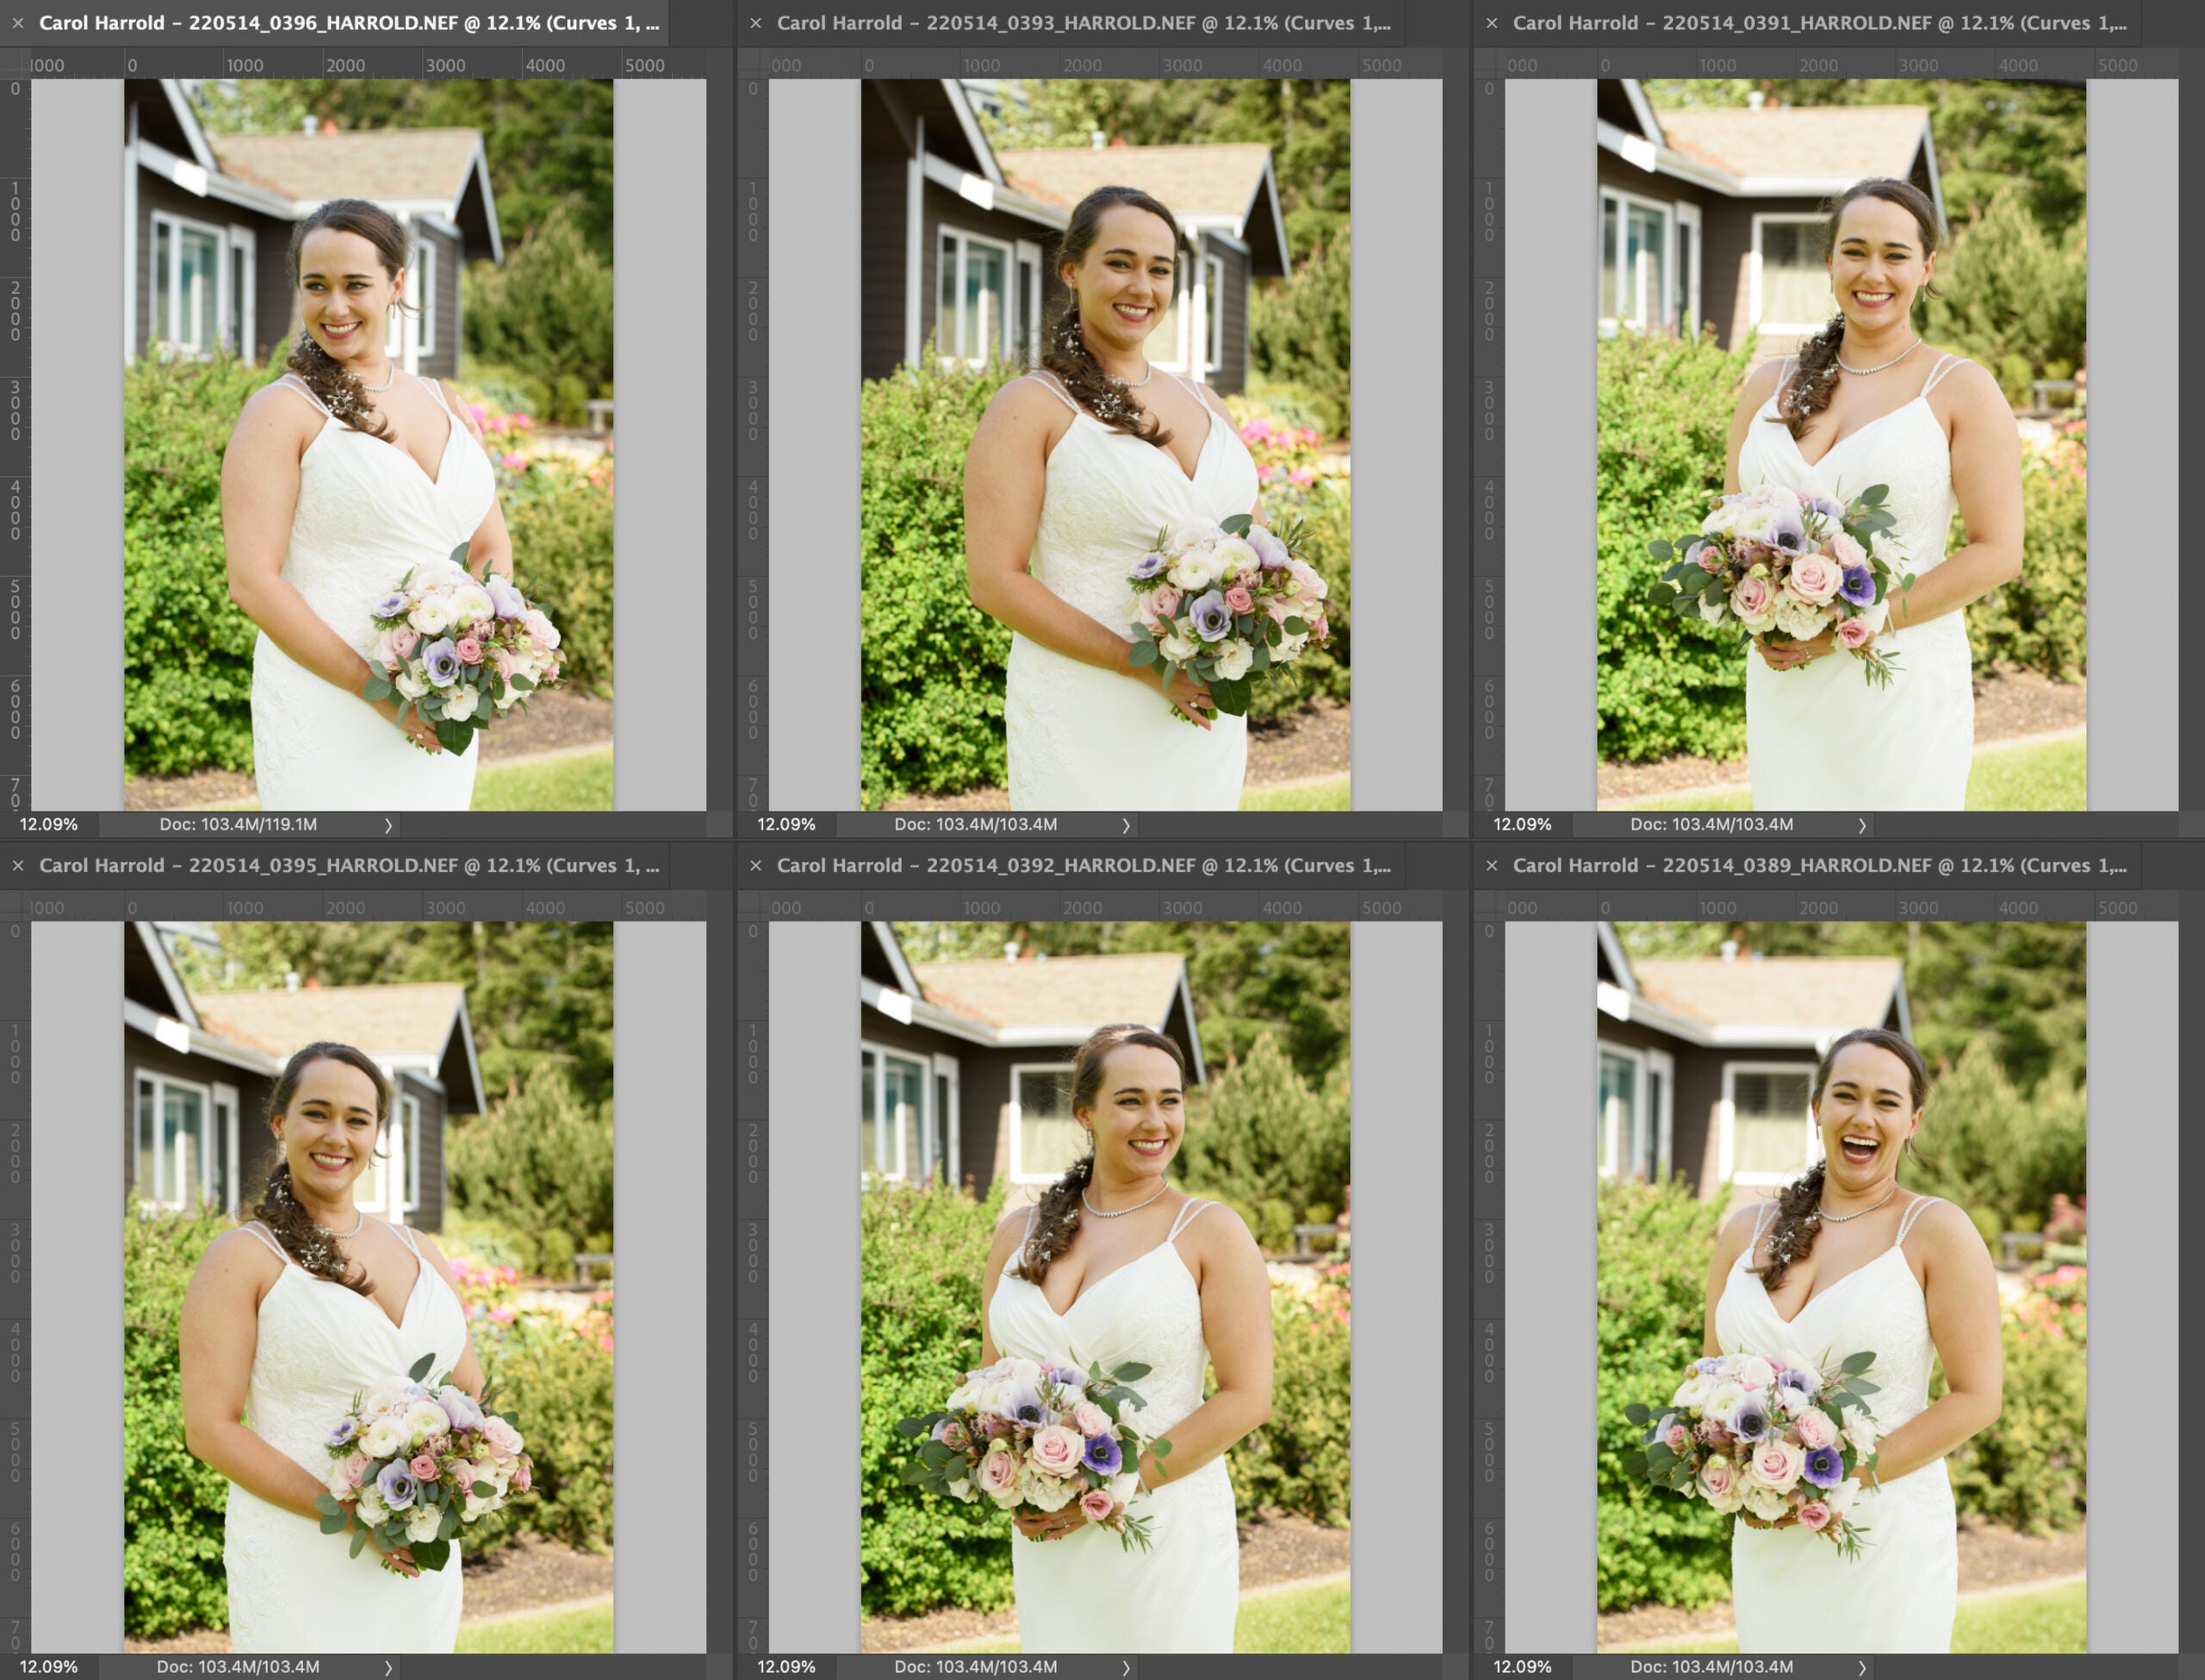 In a few seconds, the batch process applies the edits and lightens the bride in the other photos.